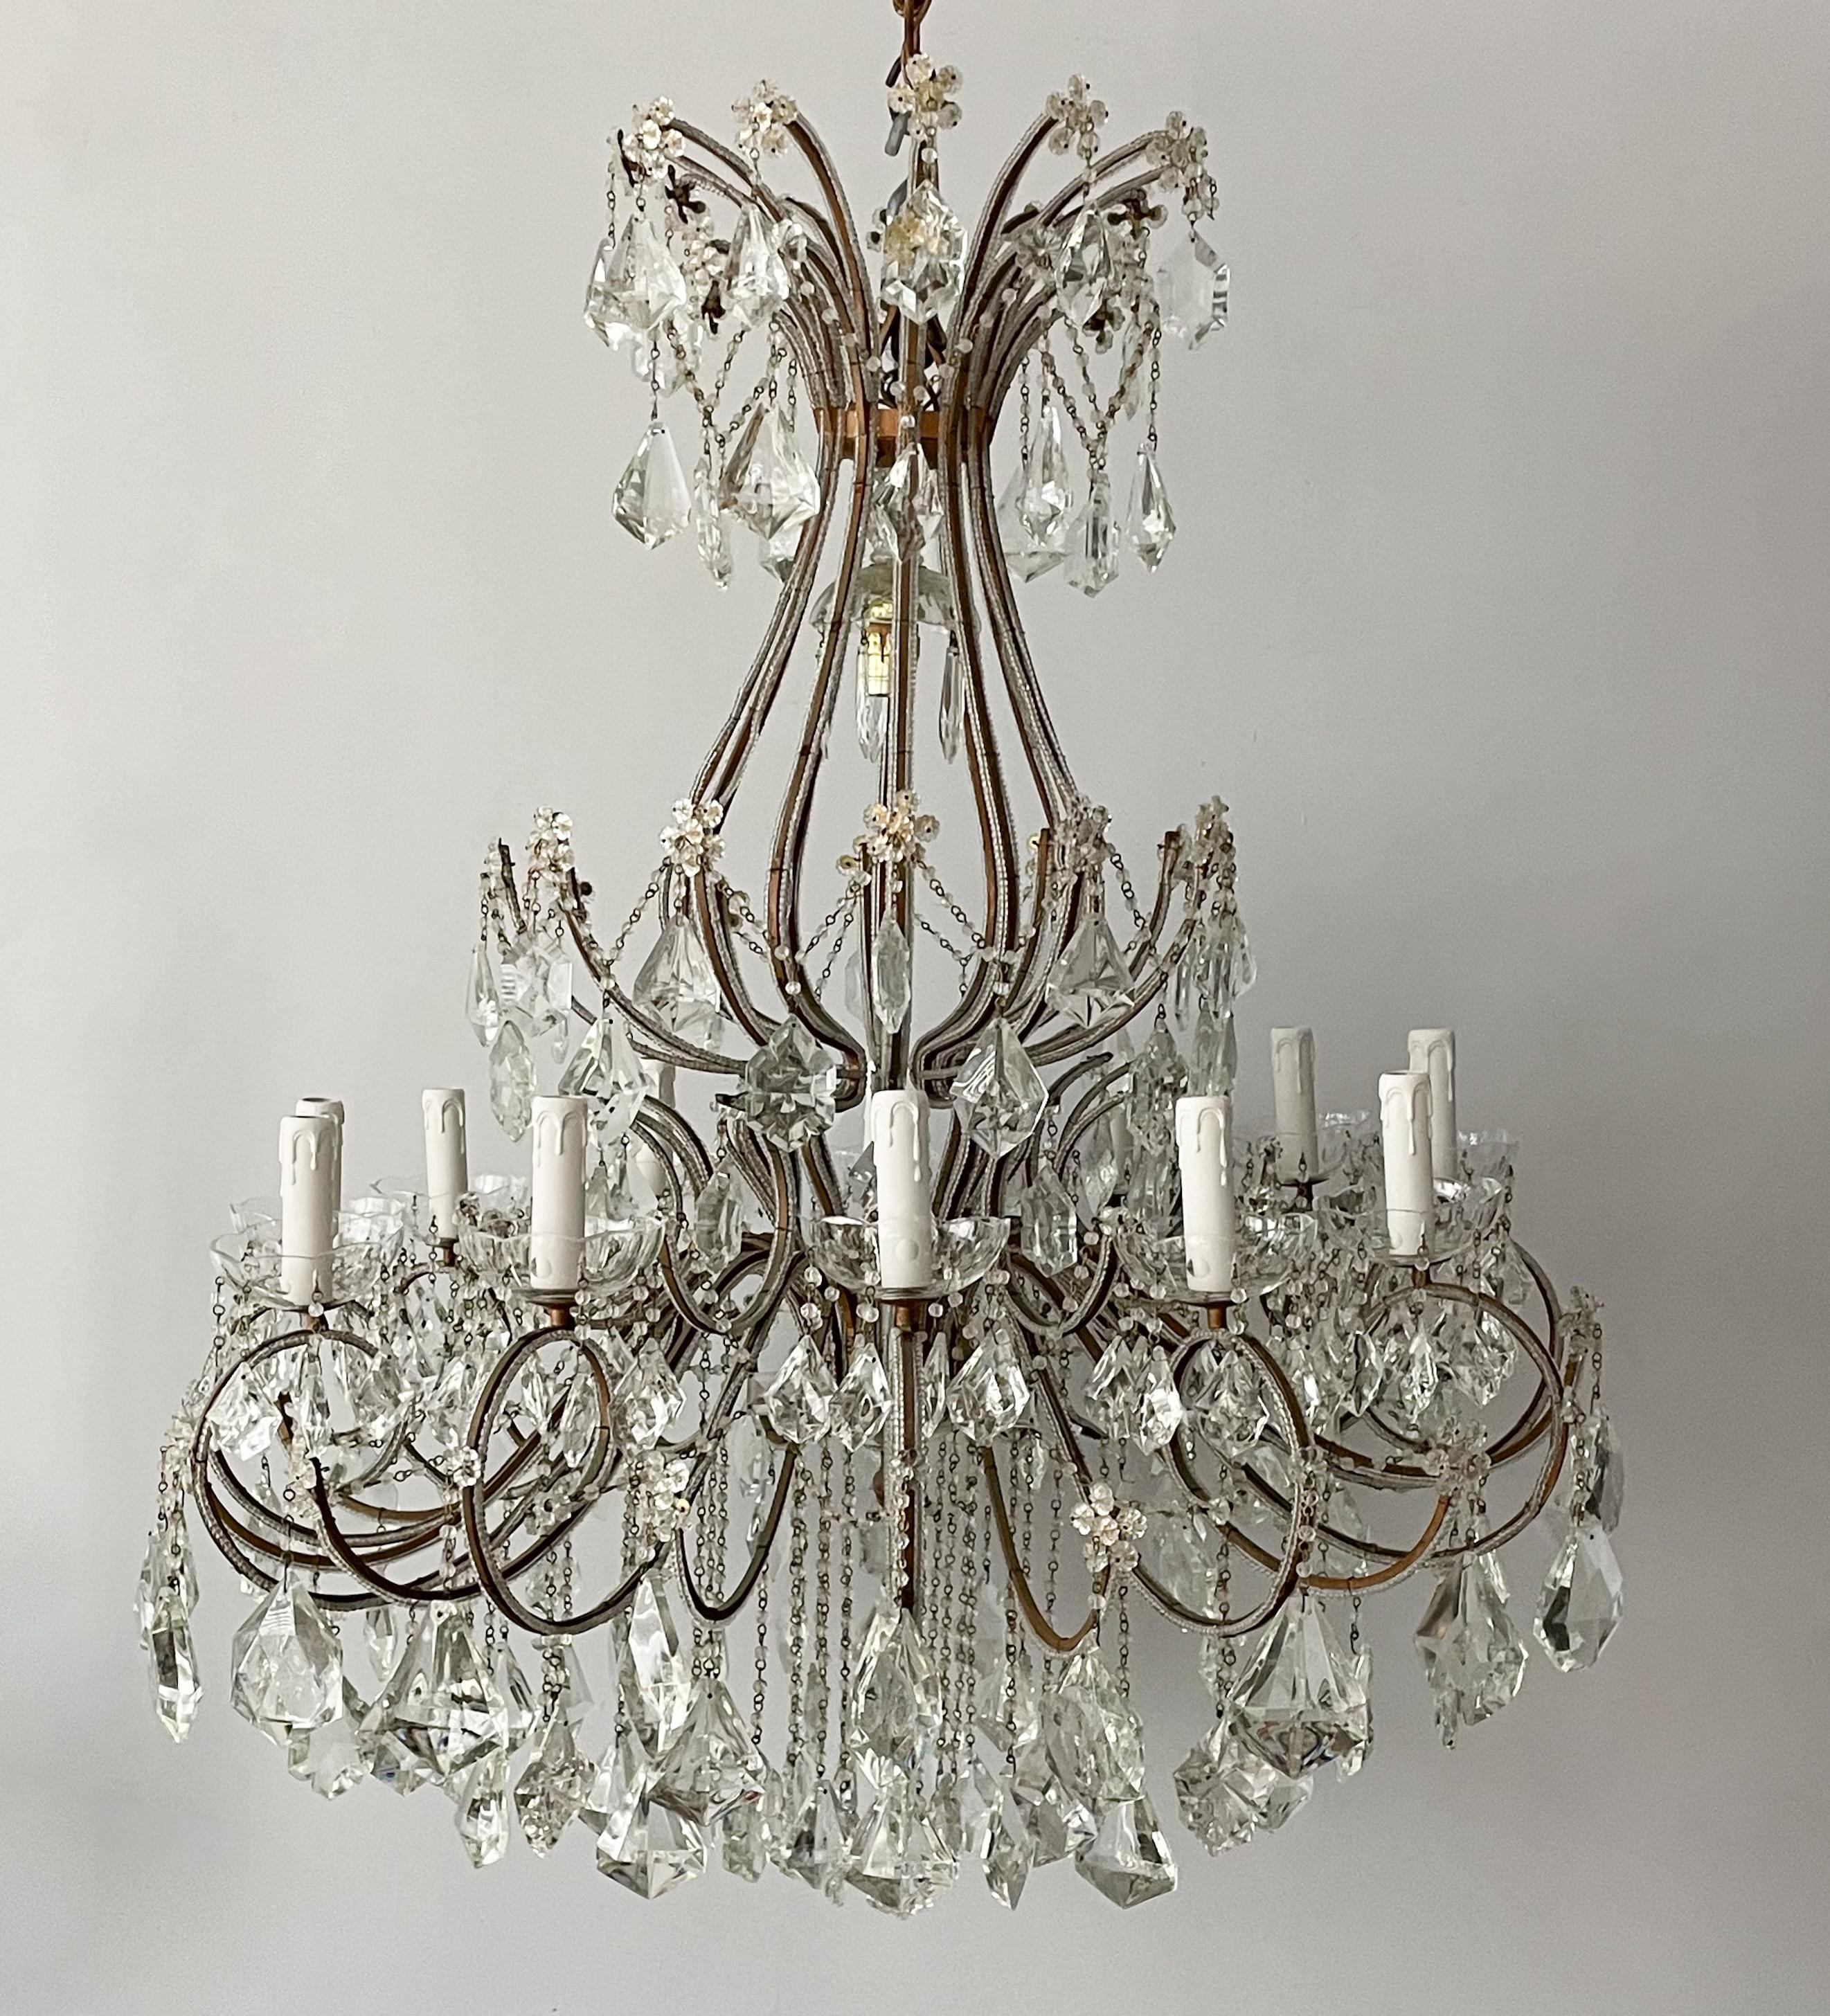 Gorgeous, vintage Italian large-scale gilt-iron and crystal beaded chandelier.

The chandelier features a graceful, scrolled iron frame in a gilt finish and an abundance of faceted prisms in a variety of shapes. 

The chandelier is wired and in